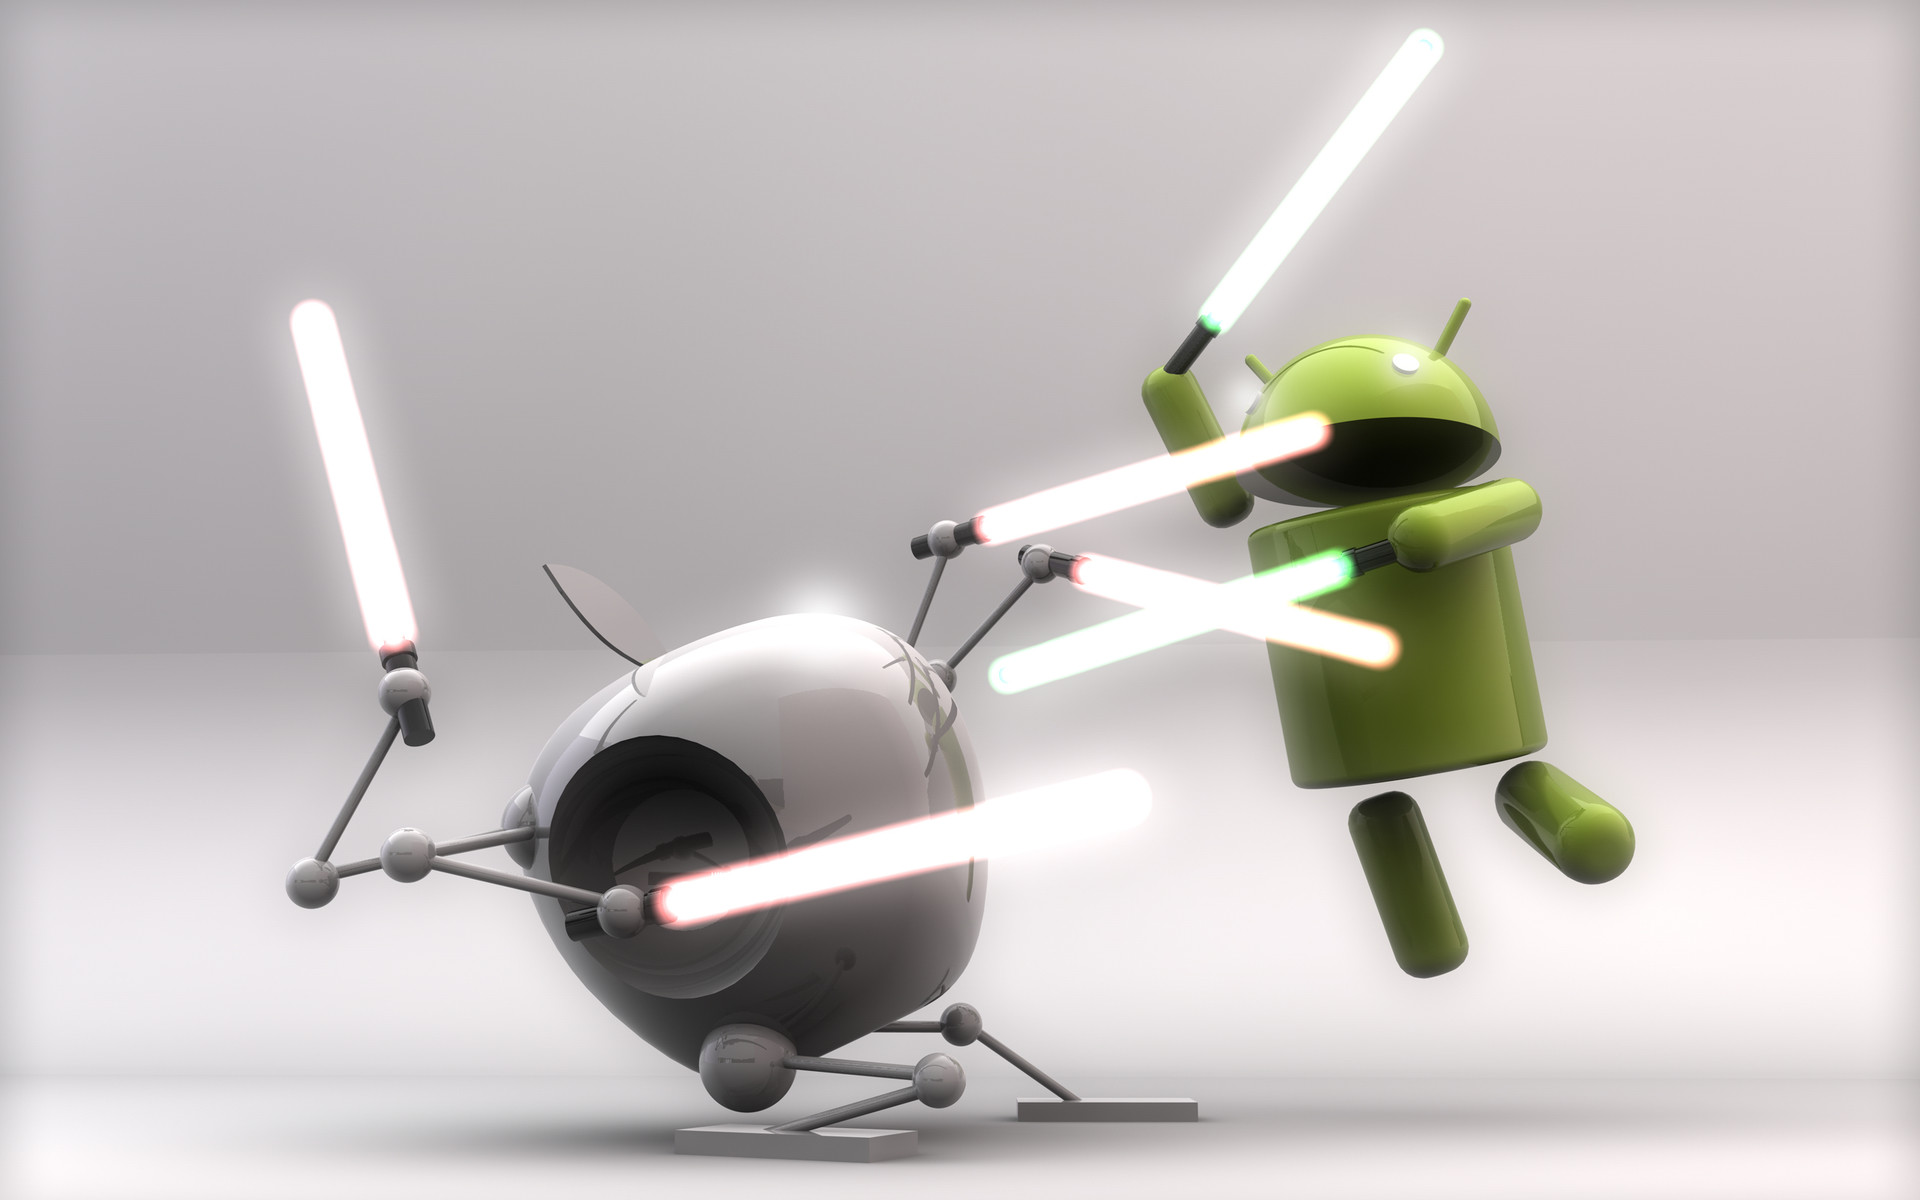 Android Vs Apple Wallpapers Android Vs Apple Wallpapers Full Hd Wallpaper Search 1920x1200